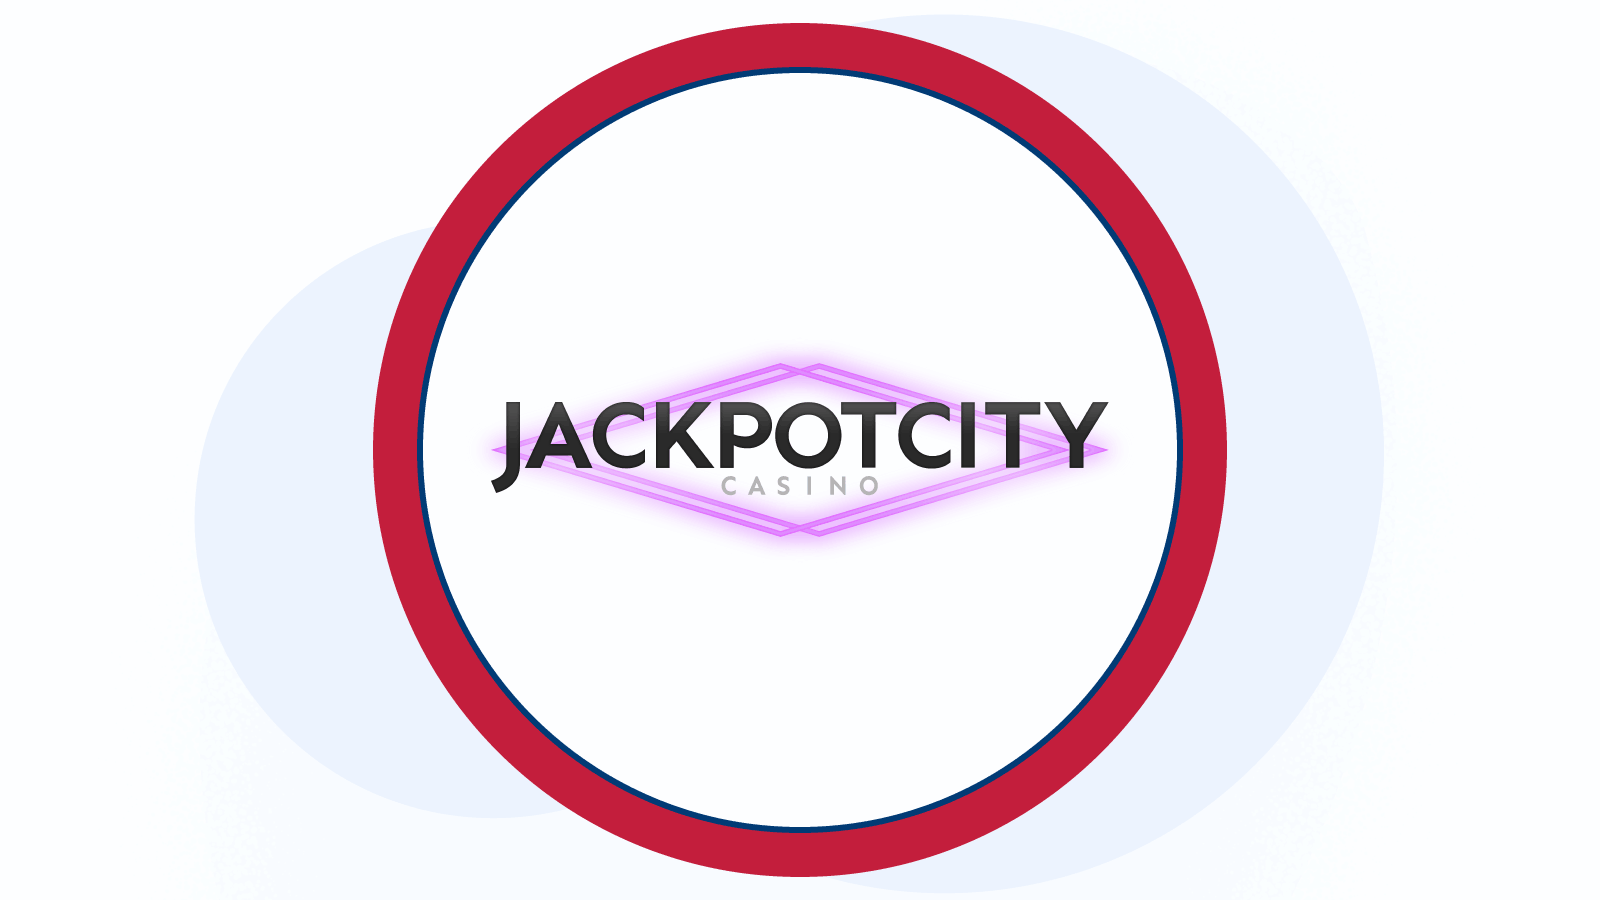 Some reasons why JackpotCity is a top choice